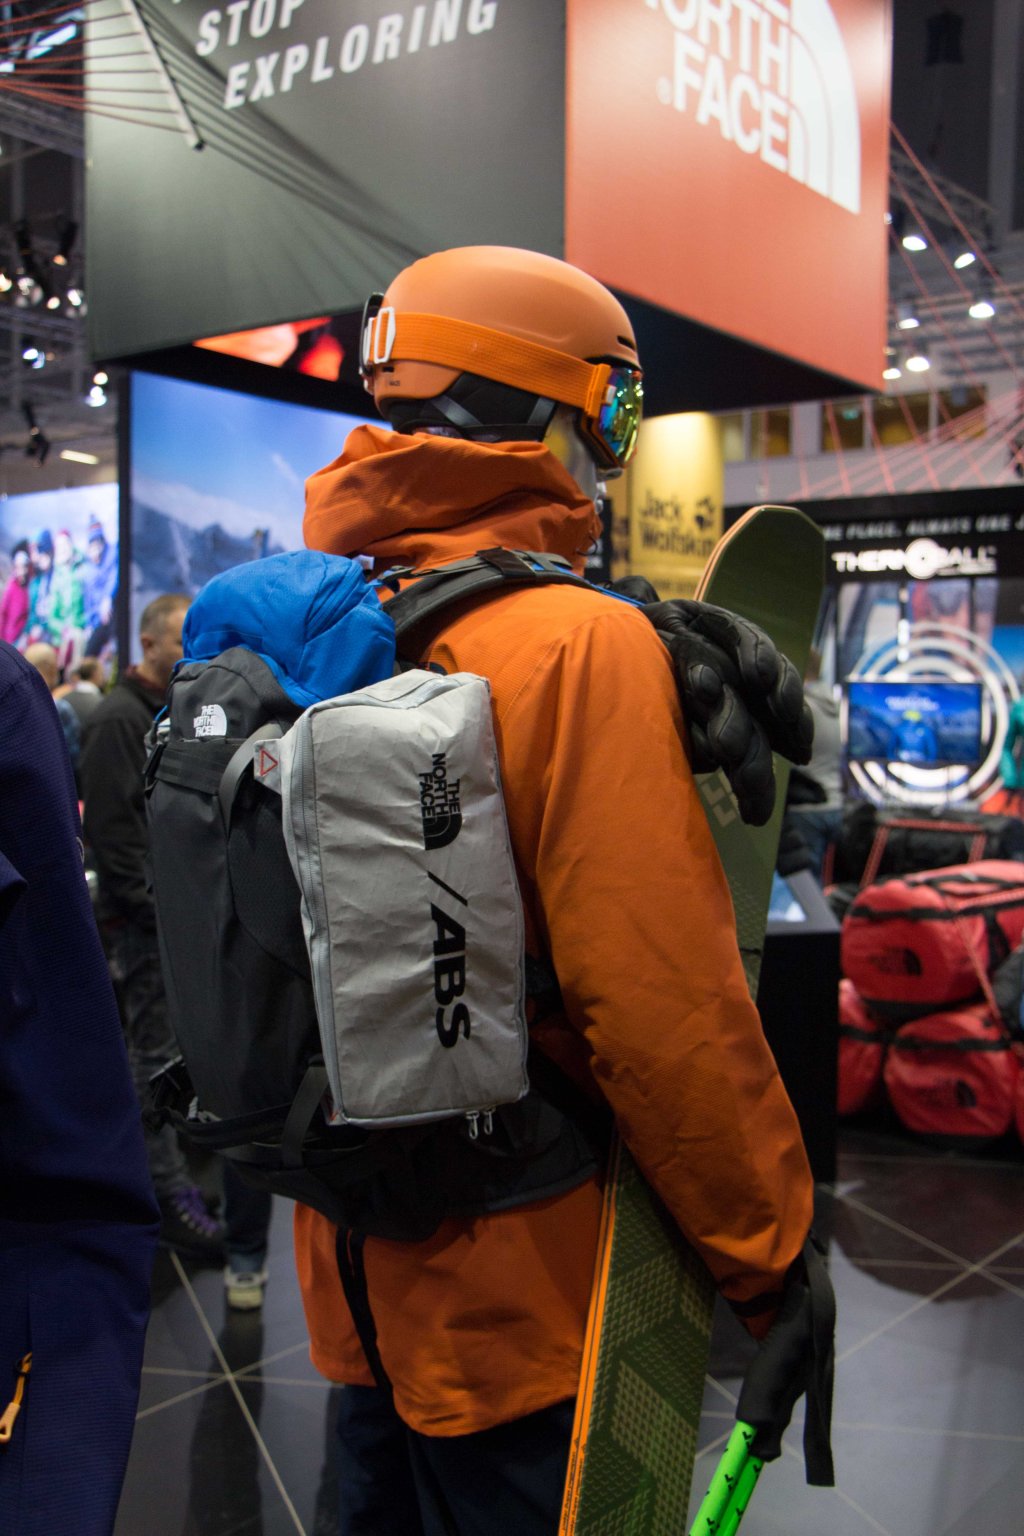 The North Face Modulator ABS System